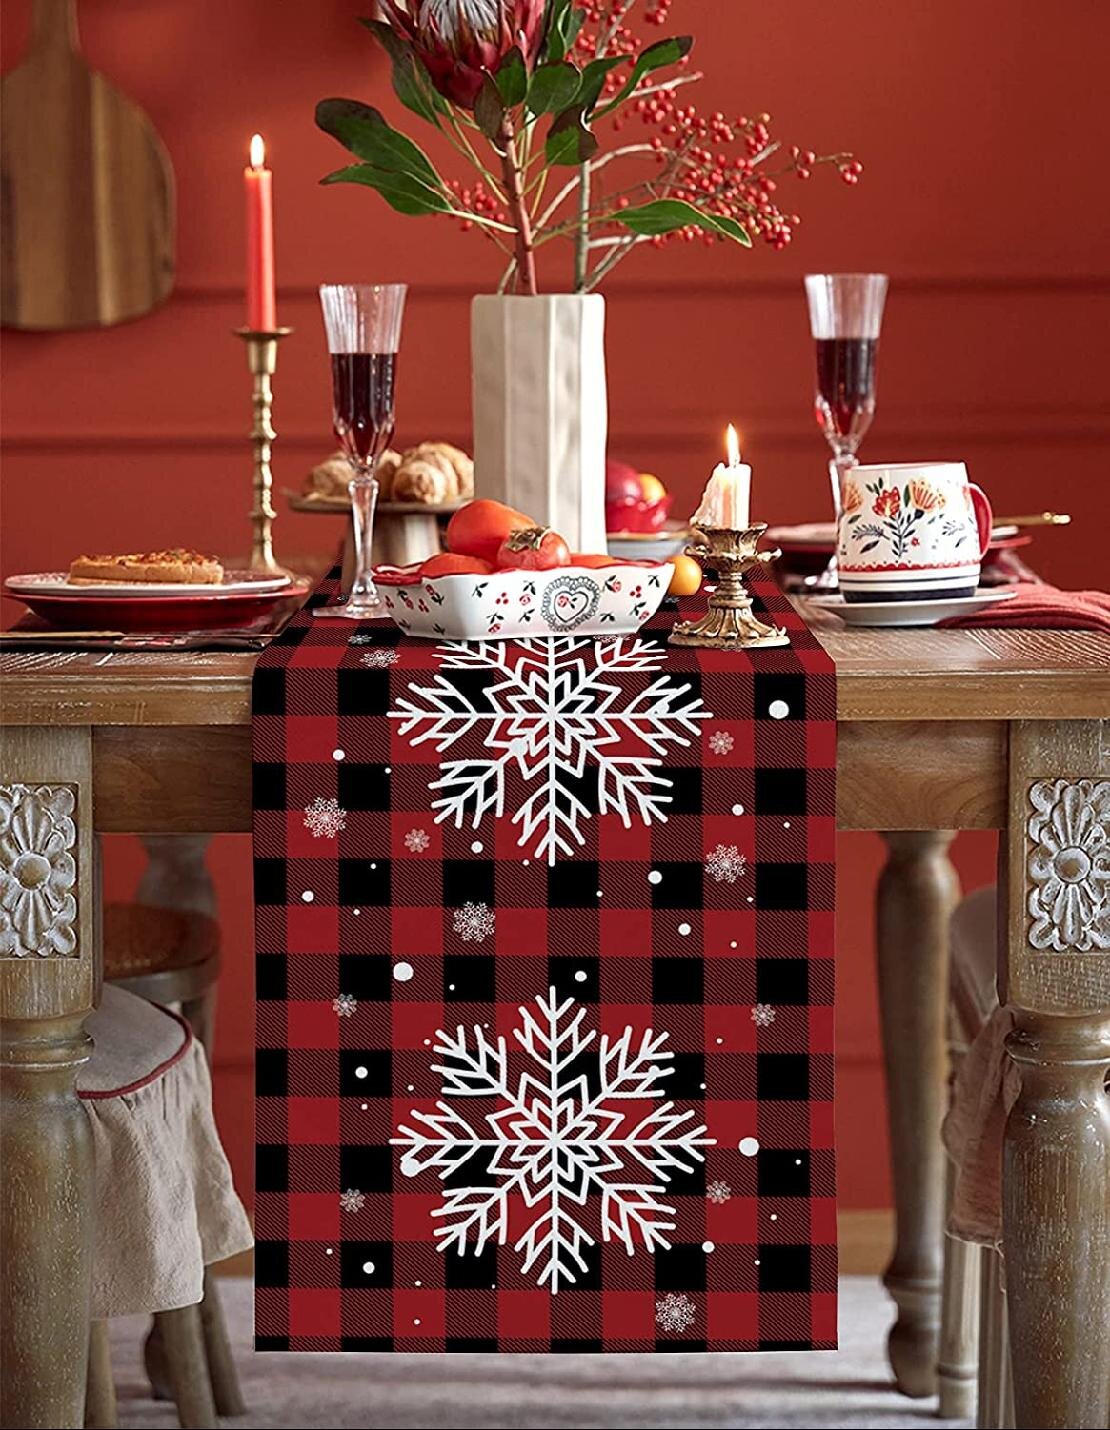 TropicalLife Table Runner 90 Inches Long Winter White Snowflakes On Red Table Runners for Party Wedding Kitchen Dining Table Living Room Decorative Dressers Scarf